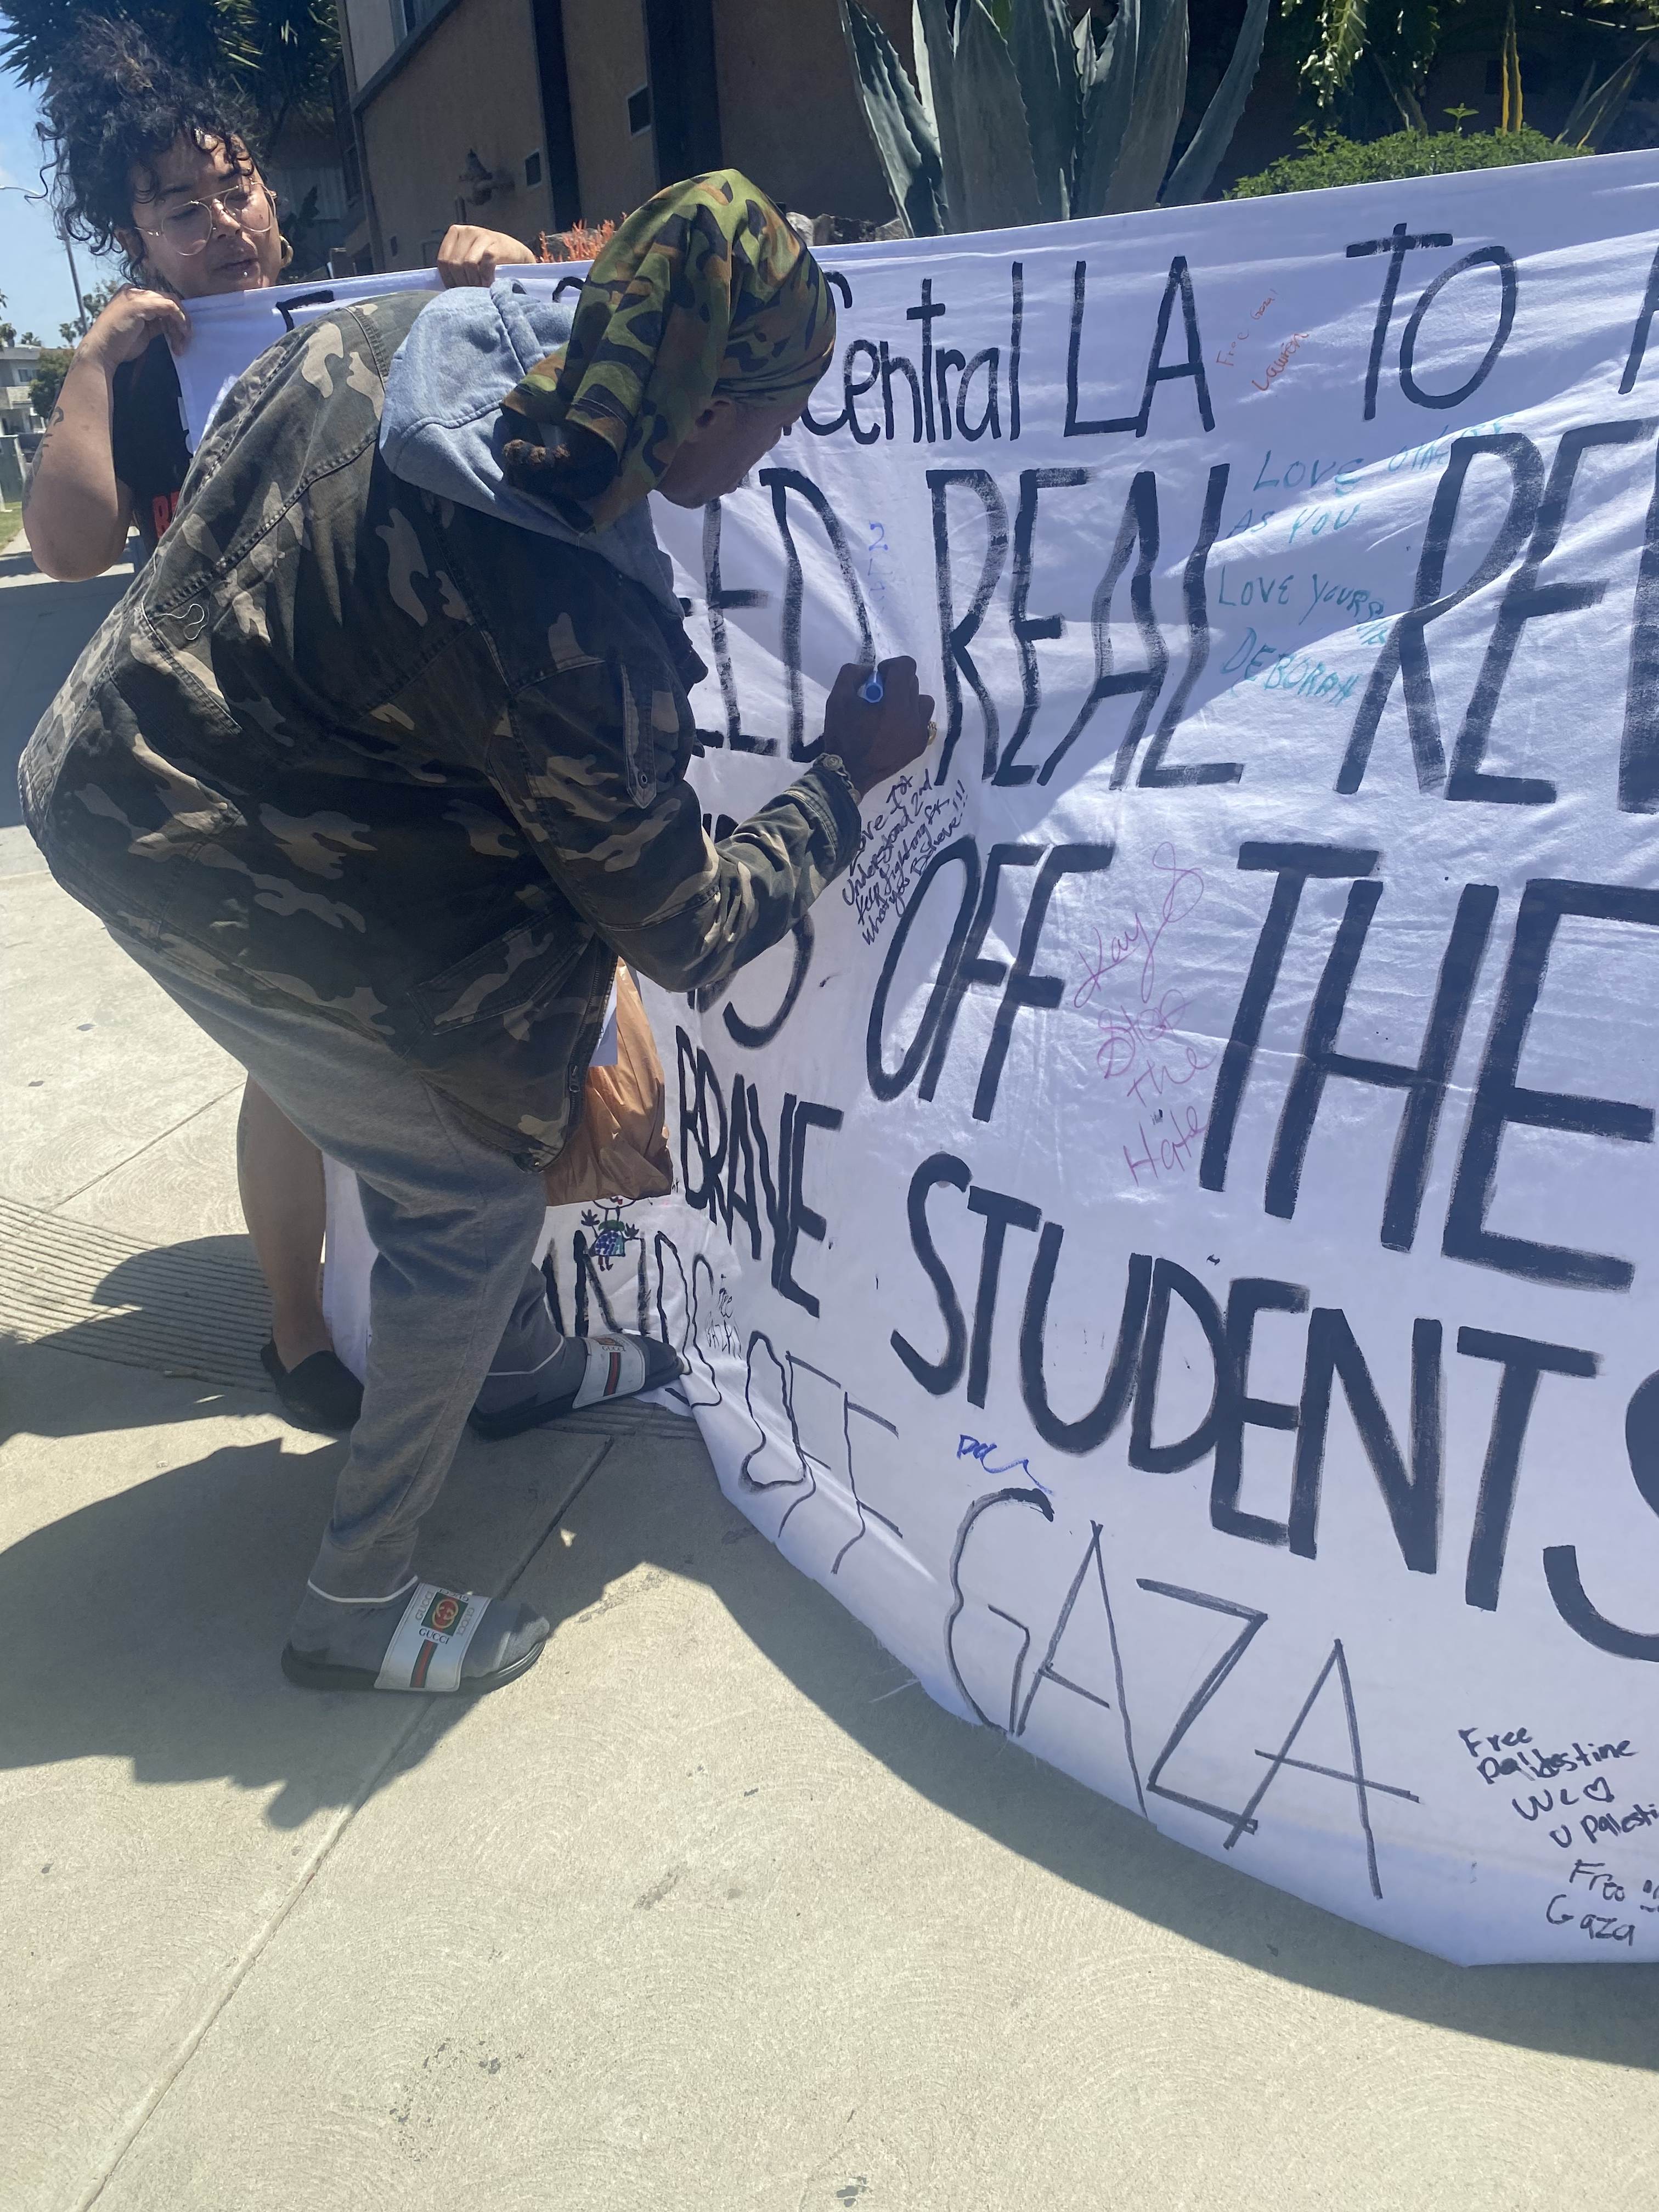 Taking Banner Supporting Protestors and Gaza to South Central Los Angeles